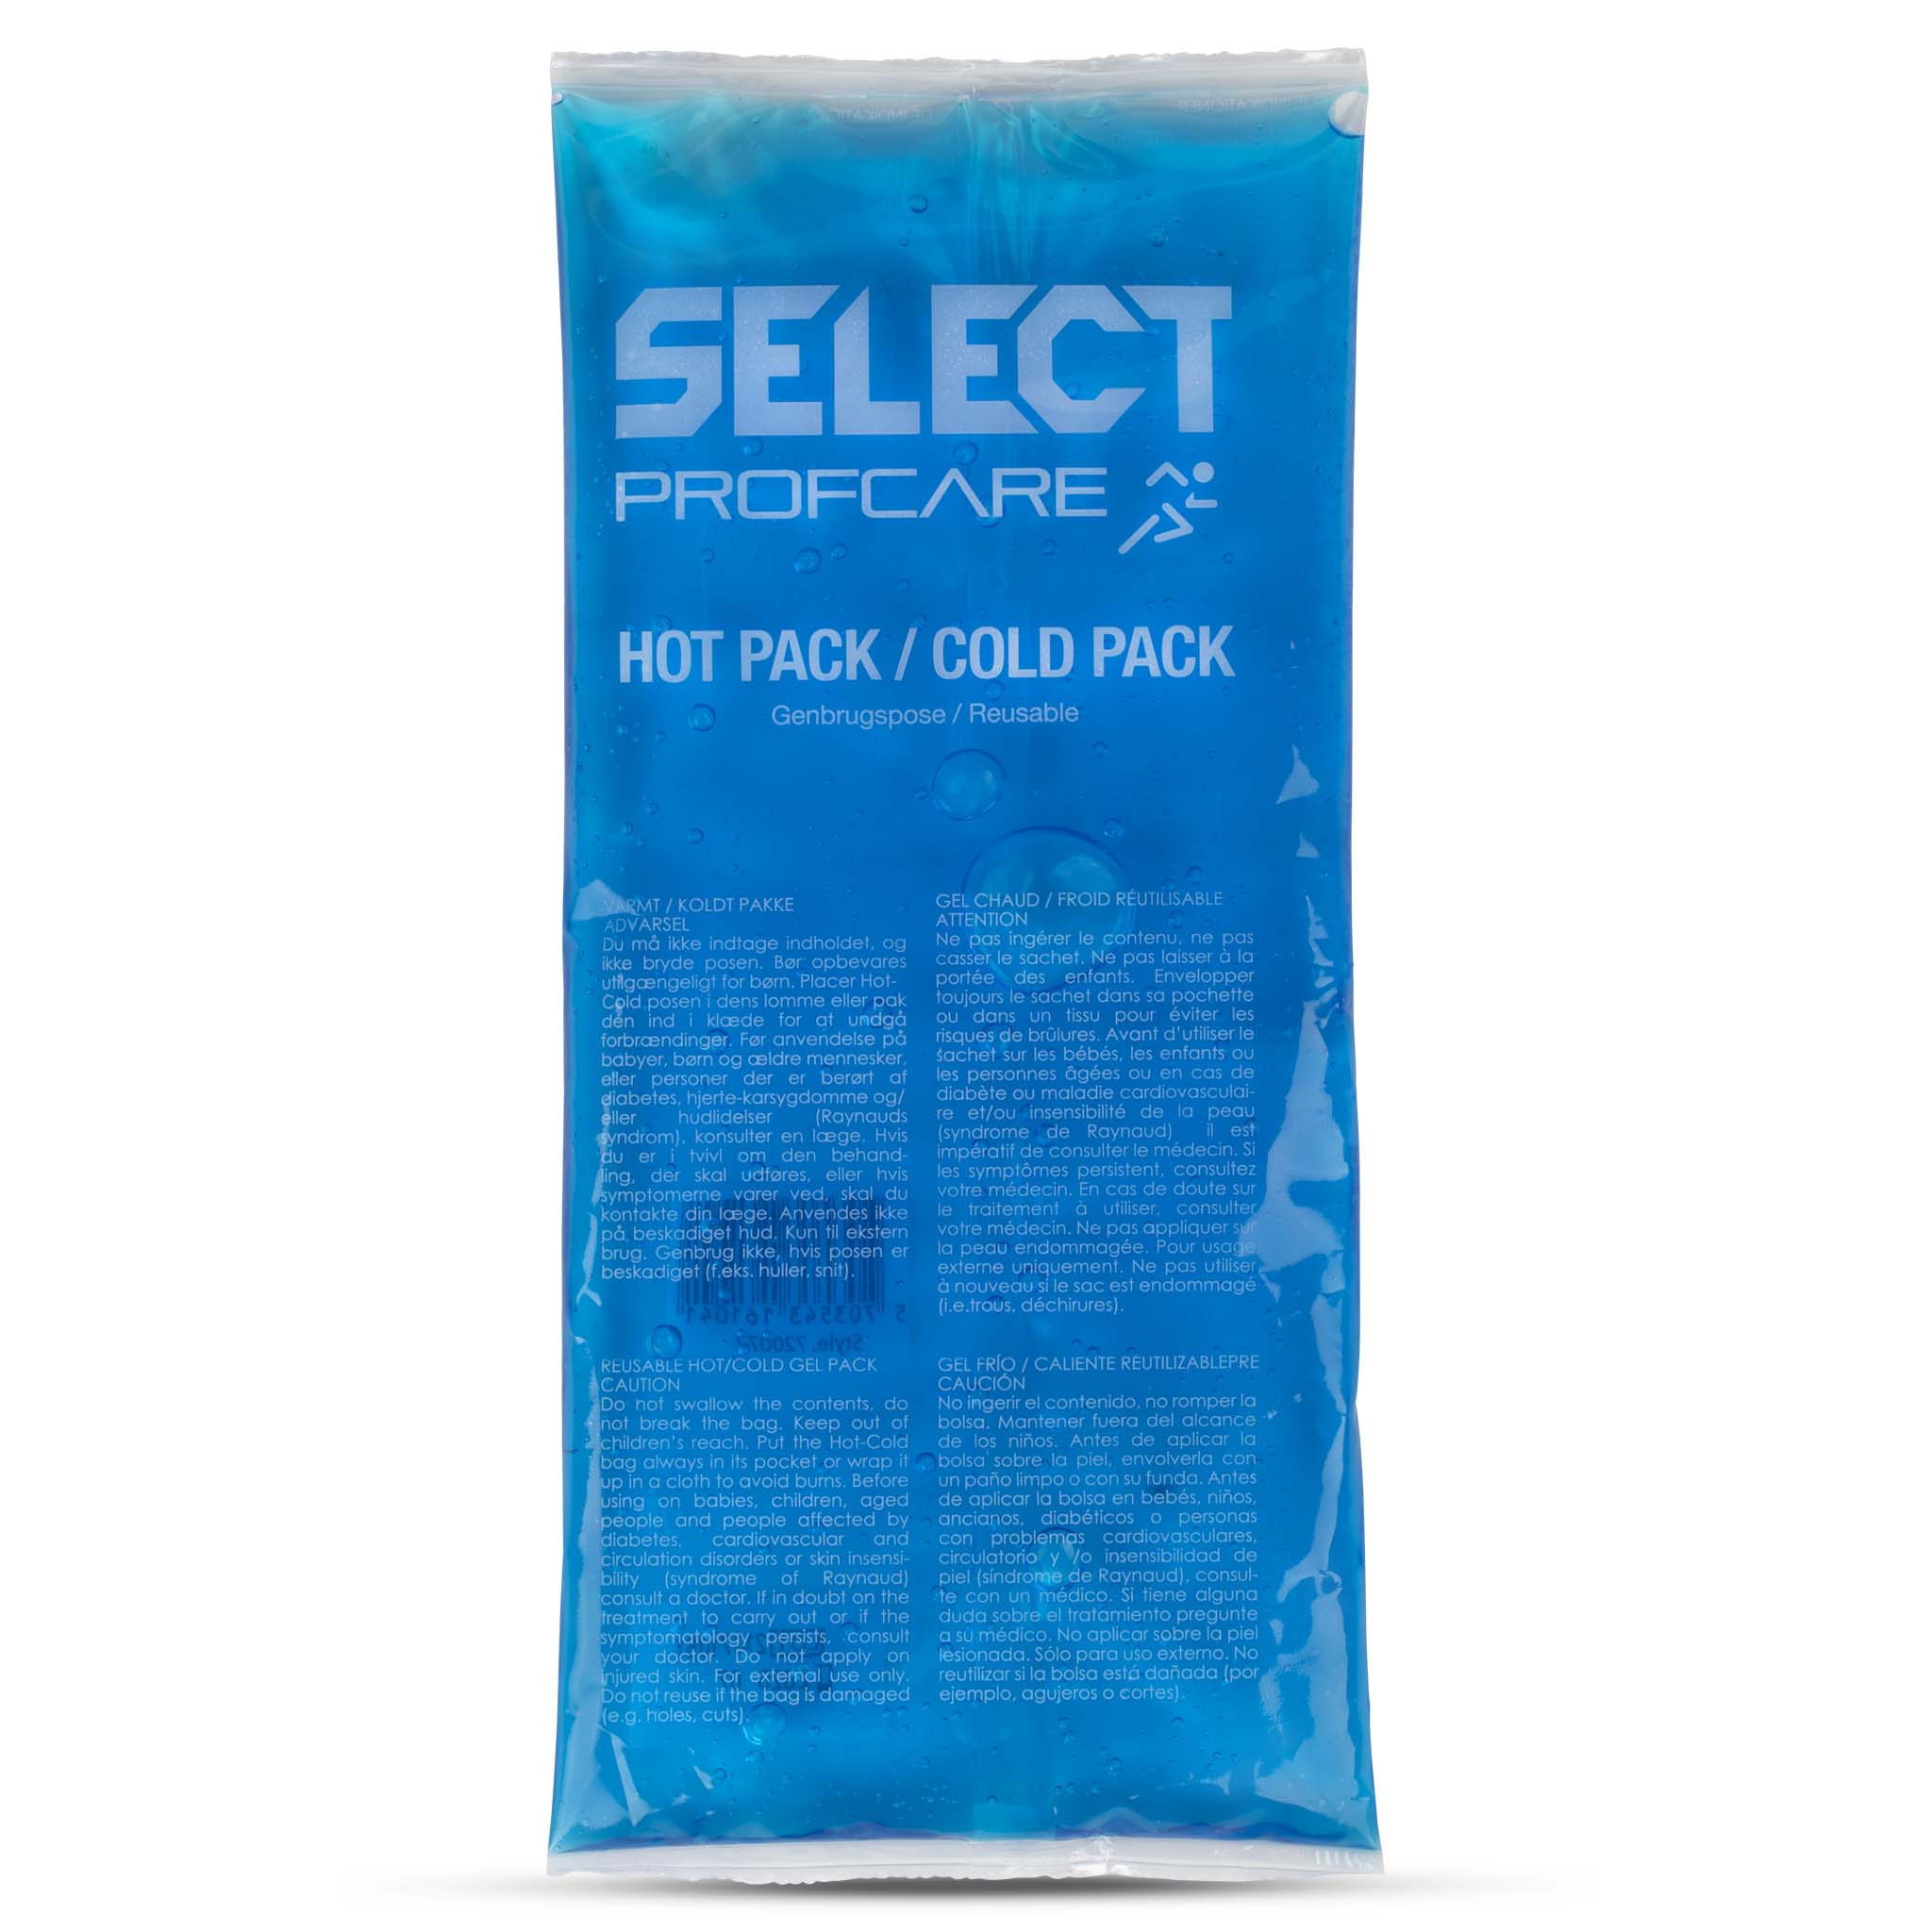 Hot/cold pack